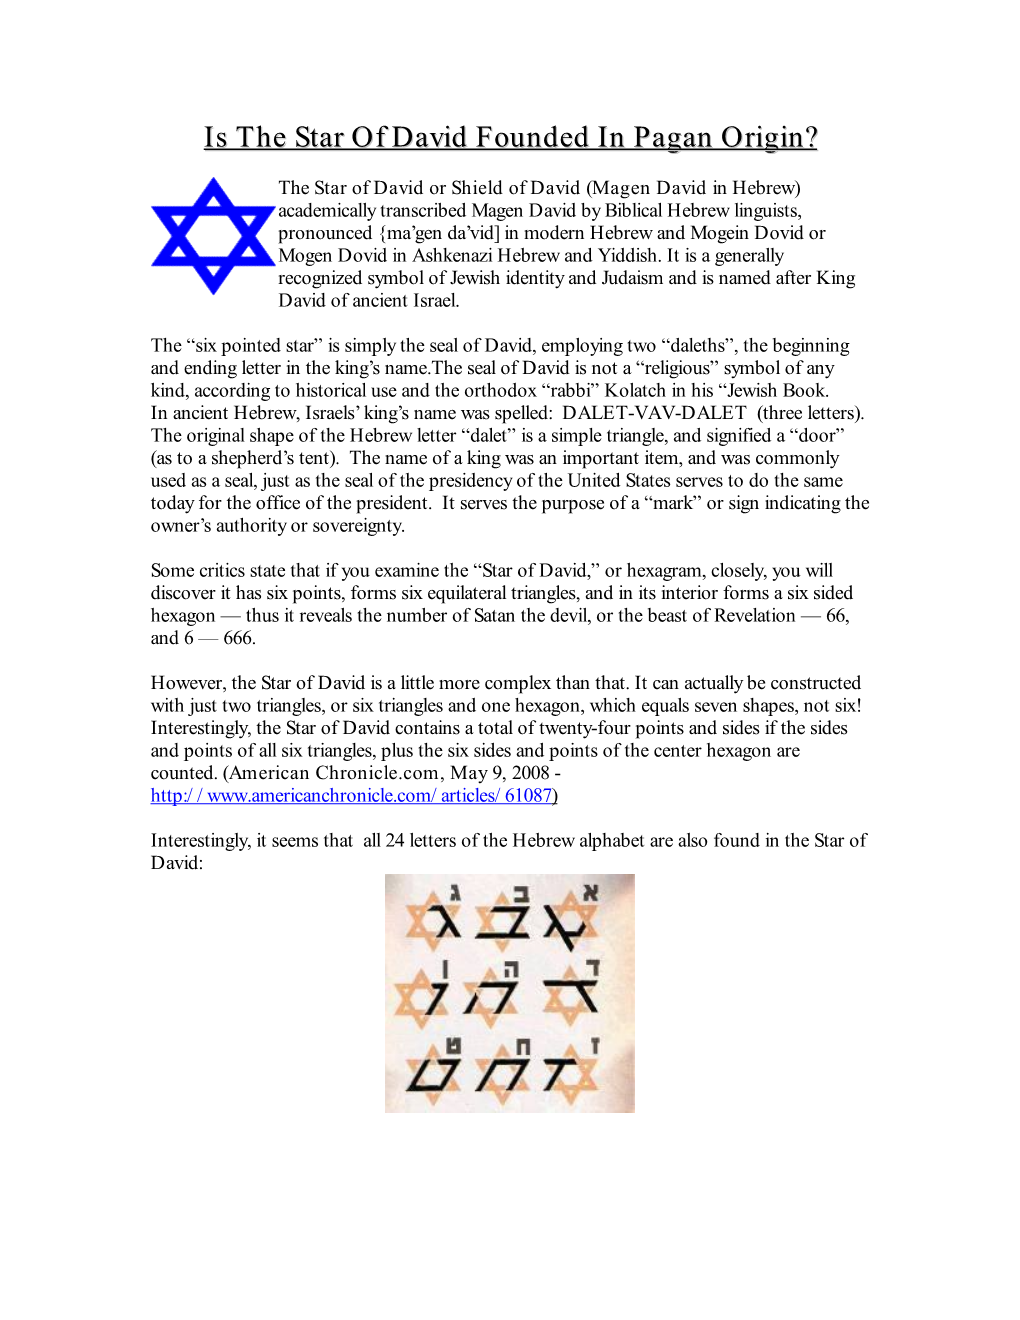 Is the Star of David Founded in Pagan Origin?